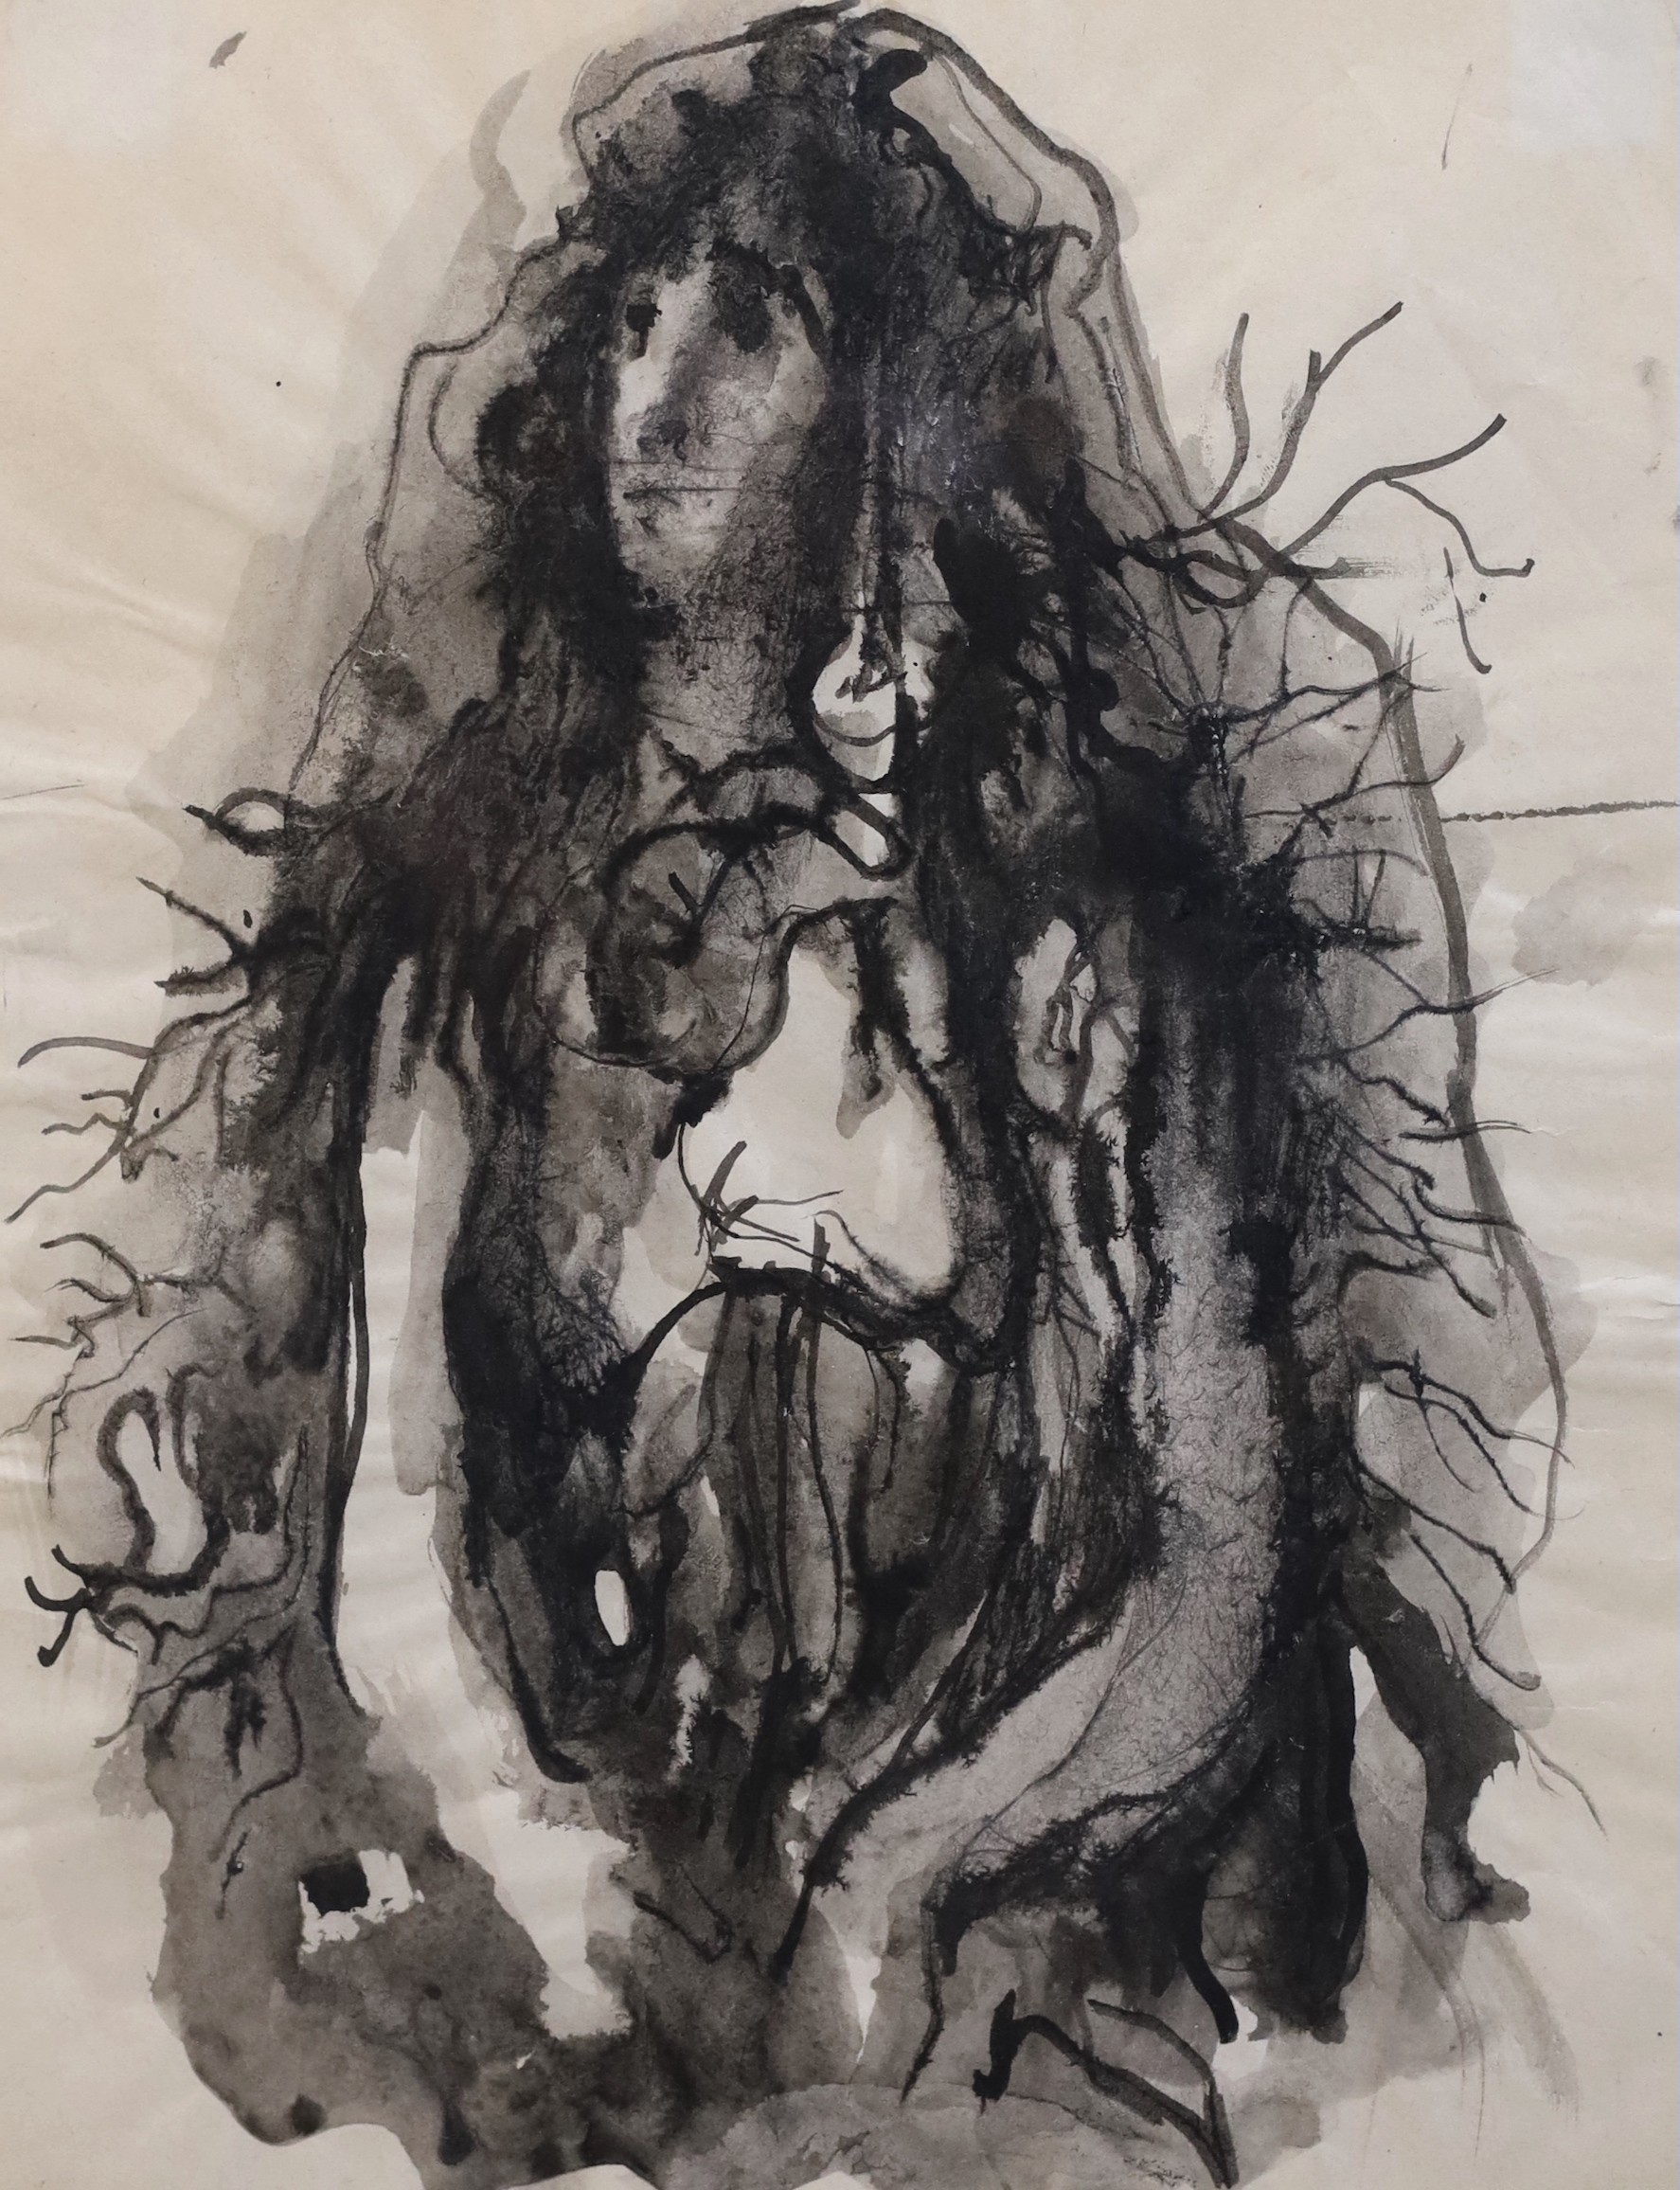 Pavel Tchelitchew (Russian,1898–1957), Seated female figure, ink and wash on paper, 27 x 21cm